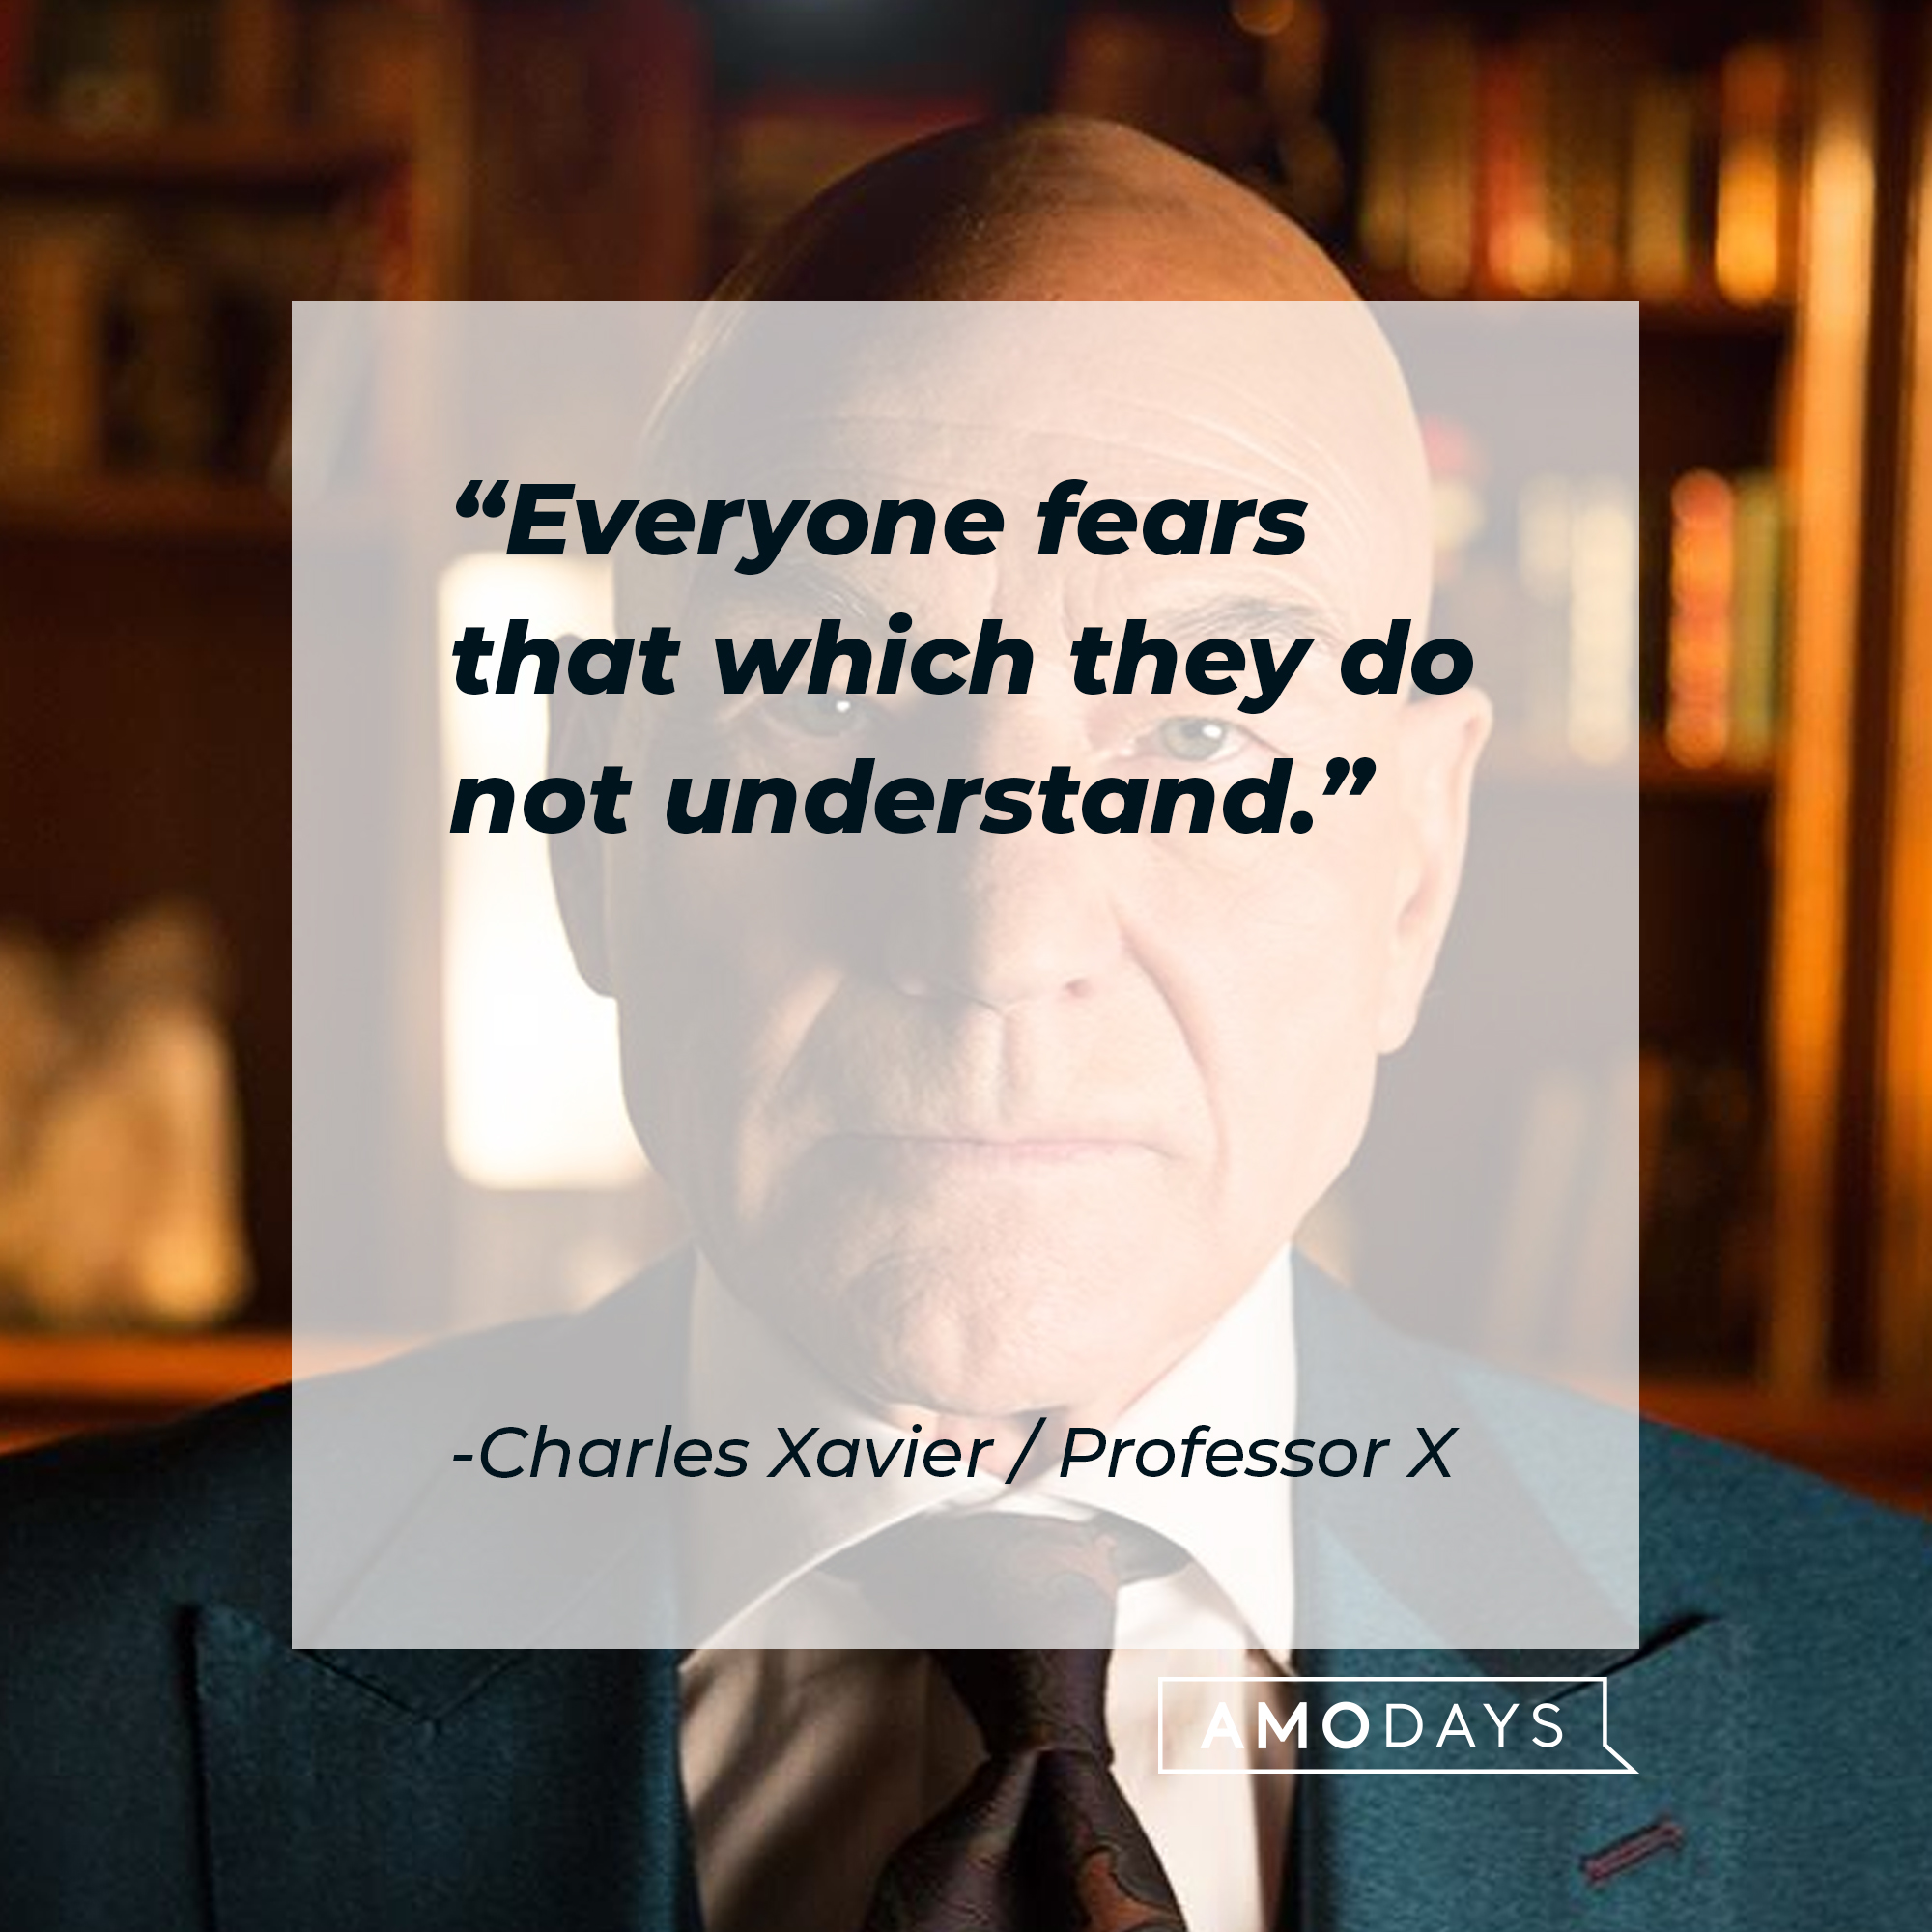 Charles Xavier / Professor X, with his quote: "Everyone fears that which they do not understand." | Source: Facebook.com/xmenmovies